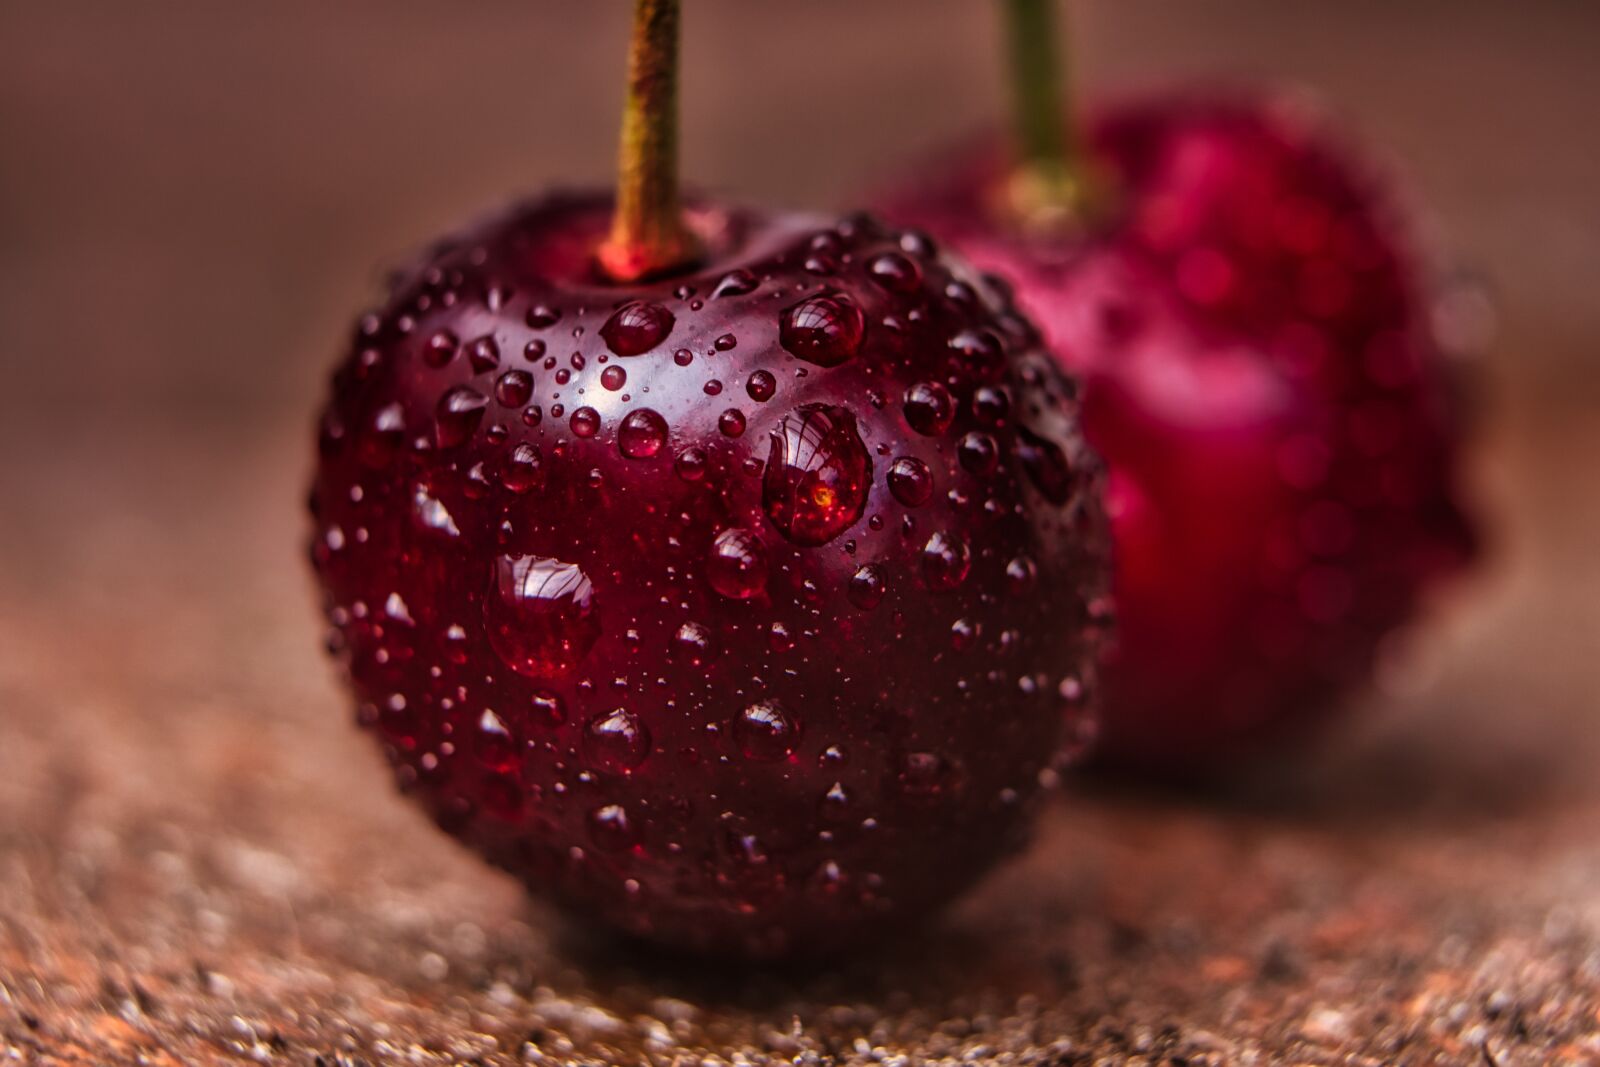 Sony a6400 sample photo. Cherries, wet, washed photography